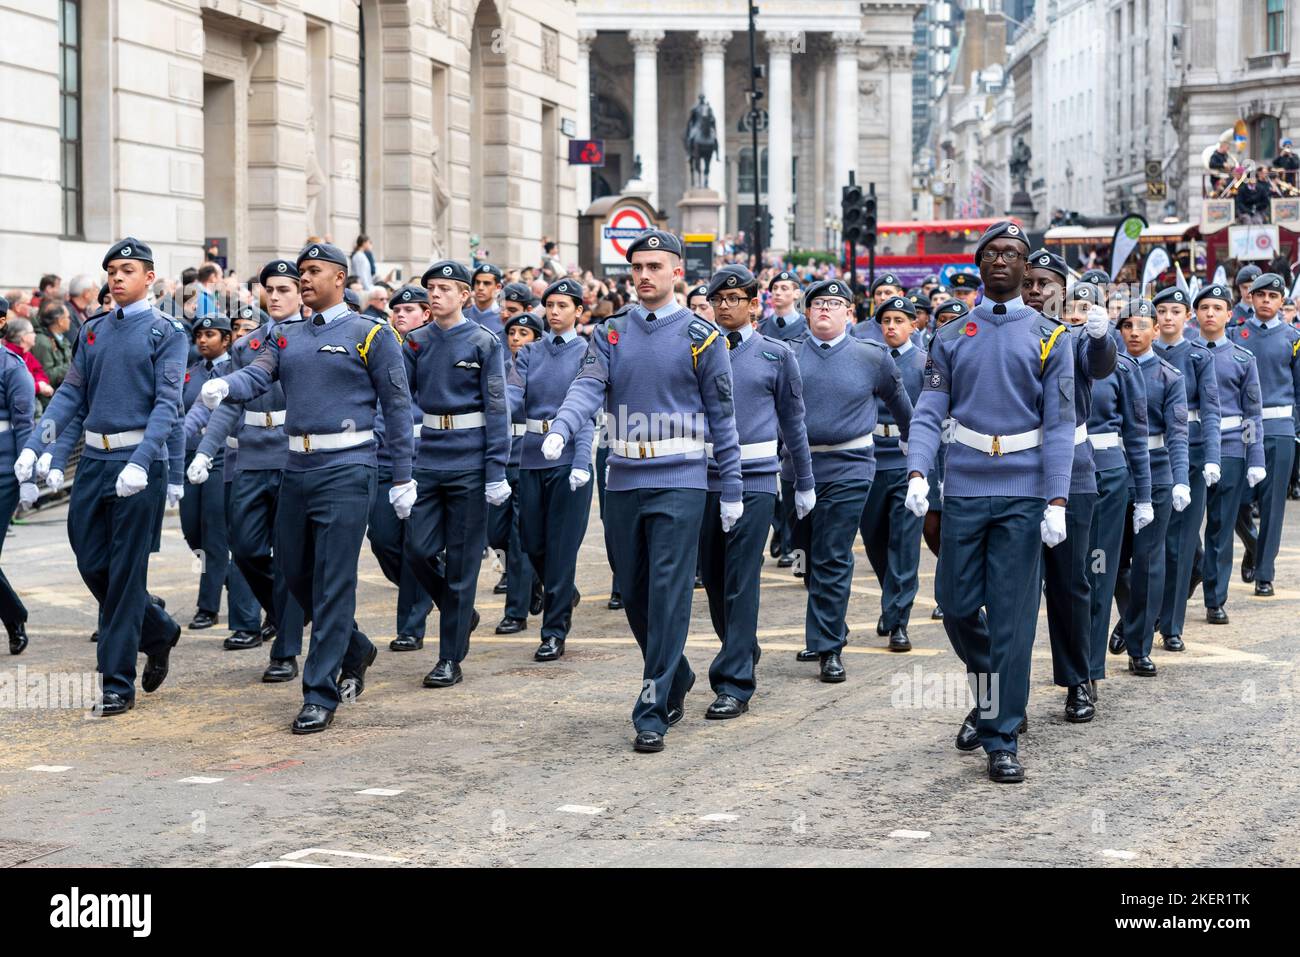 London & South East Region Royal Air Force Air Cadets bei der Lord Mayor's Show Parade in der City of London, Großbritannien Stockfoto